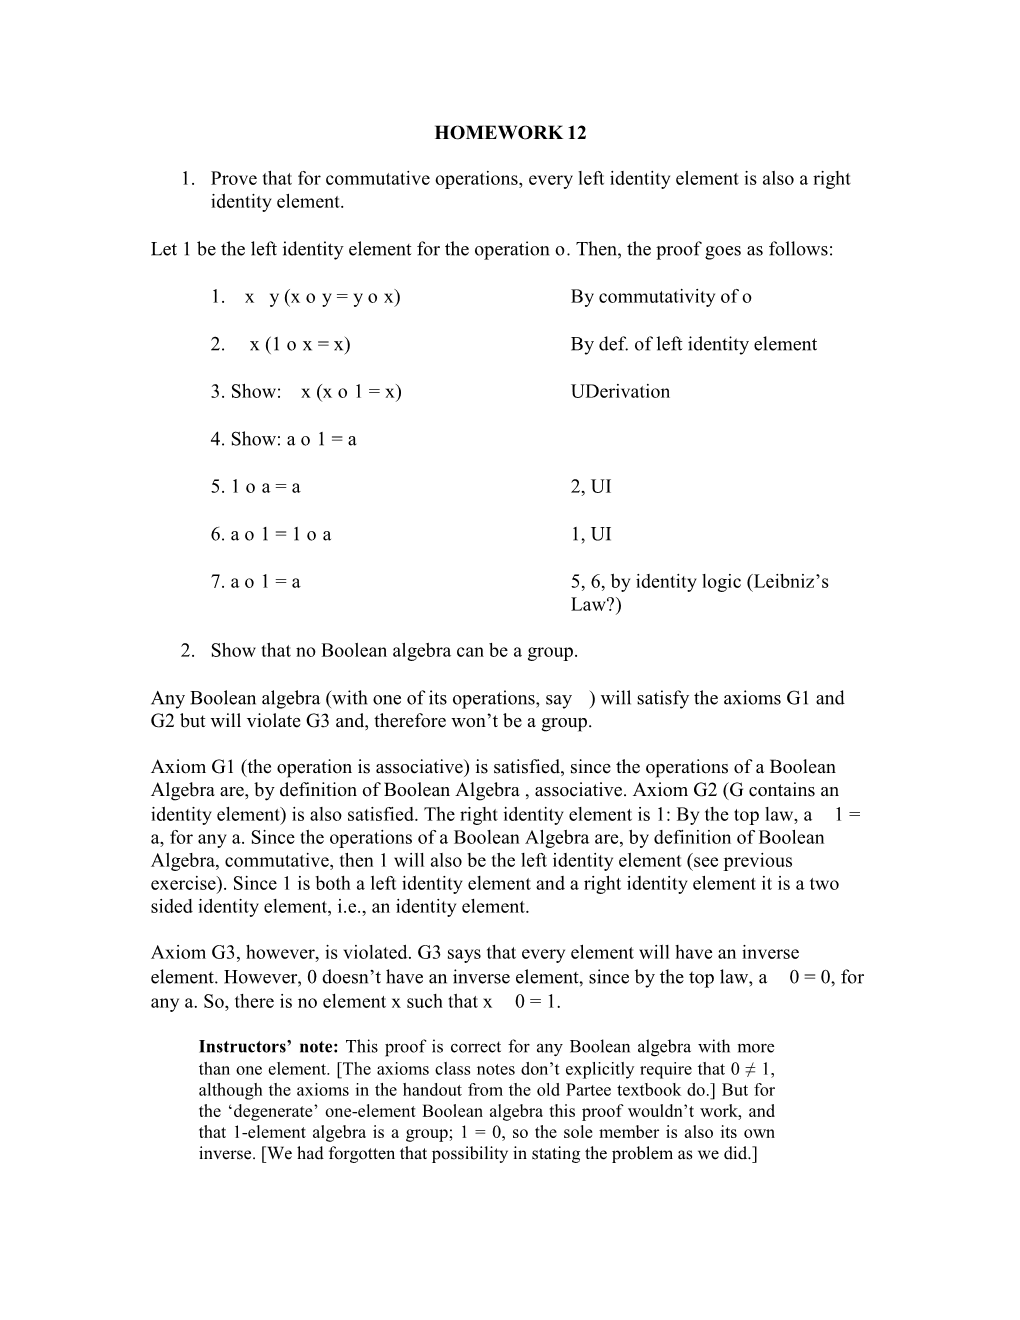 HOMEWORK 12 1. Prove That for Commutative Operations, Every Left